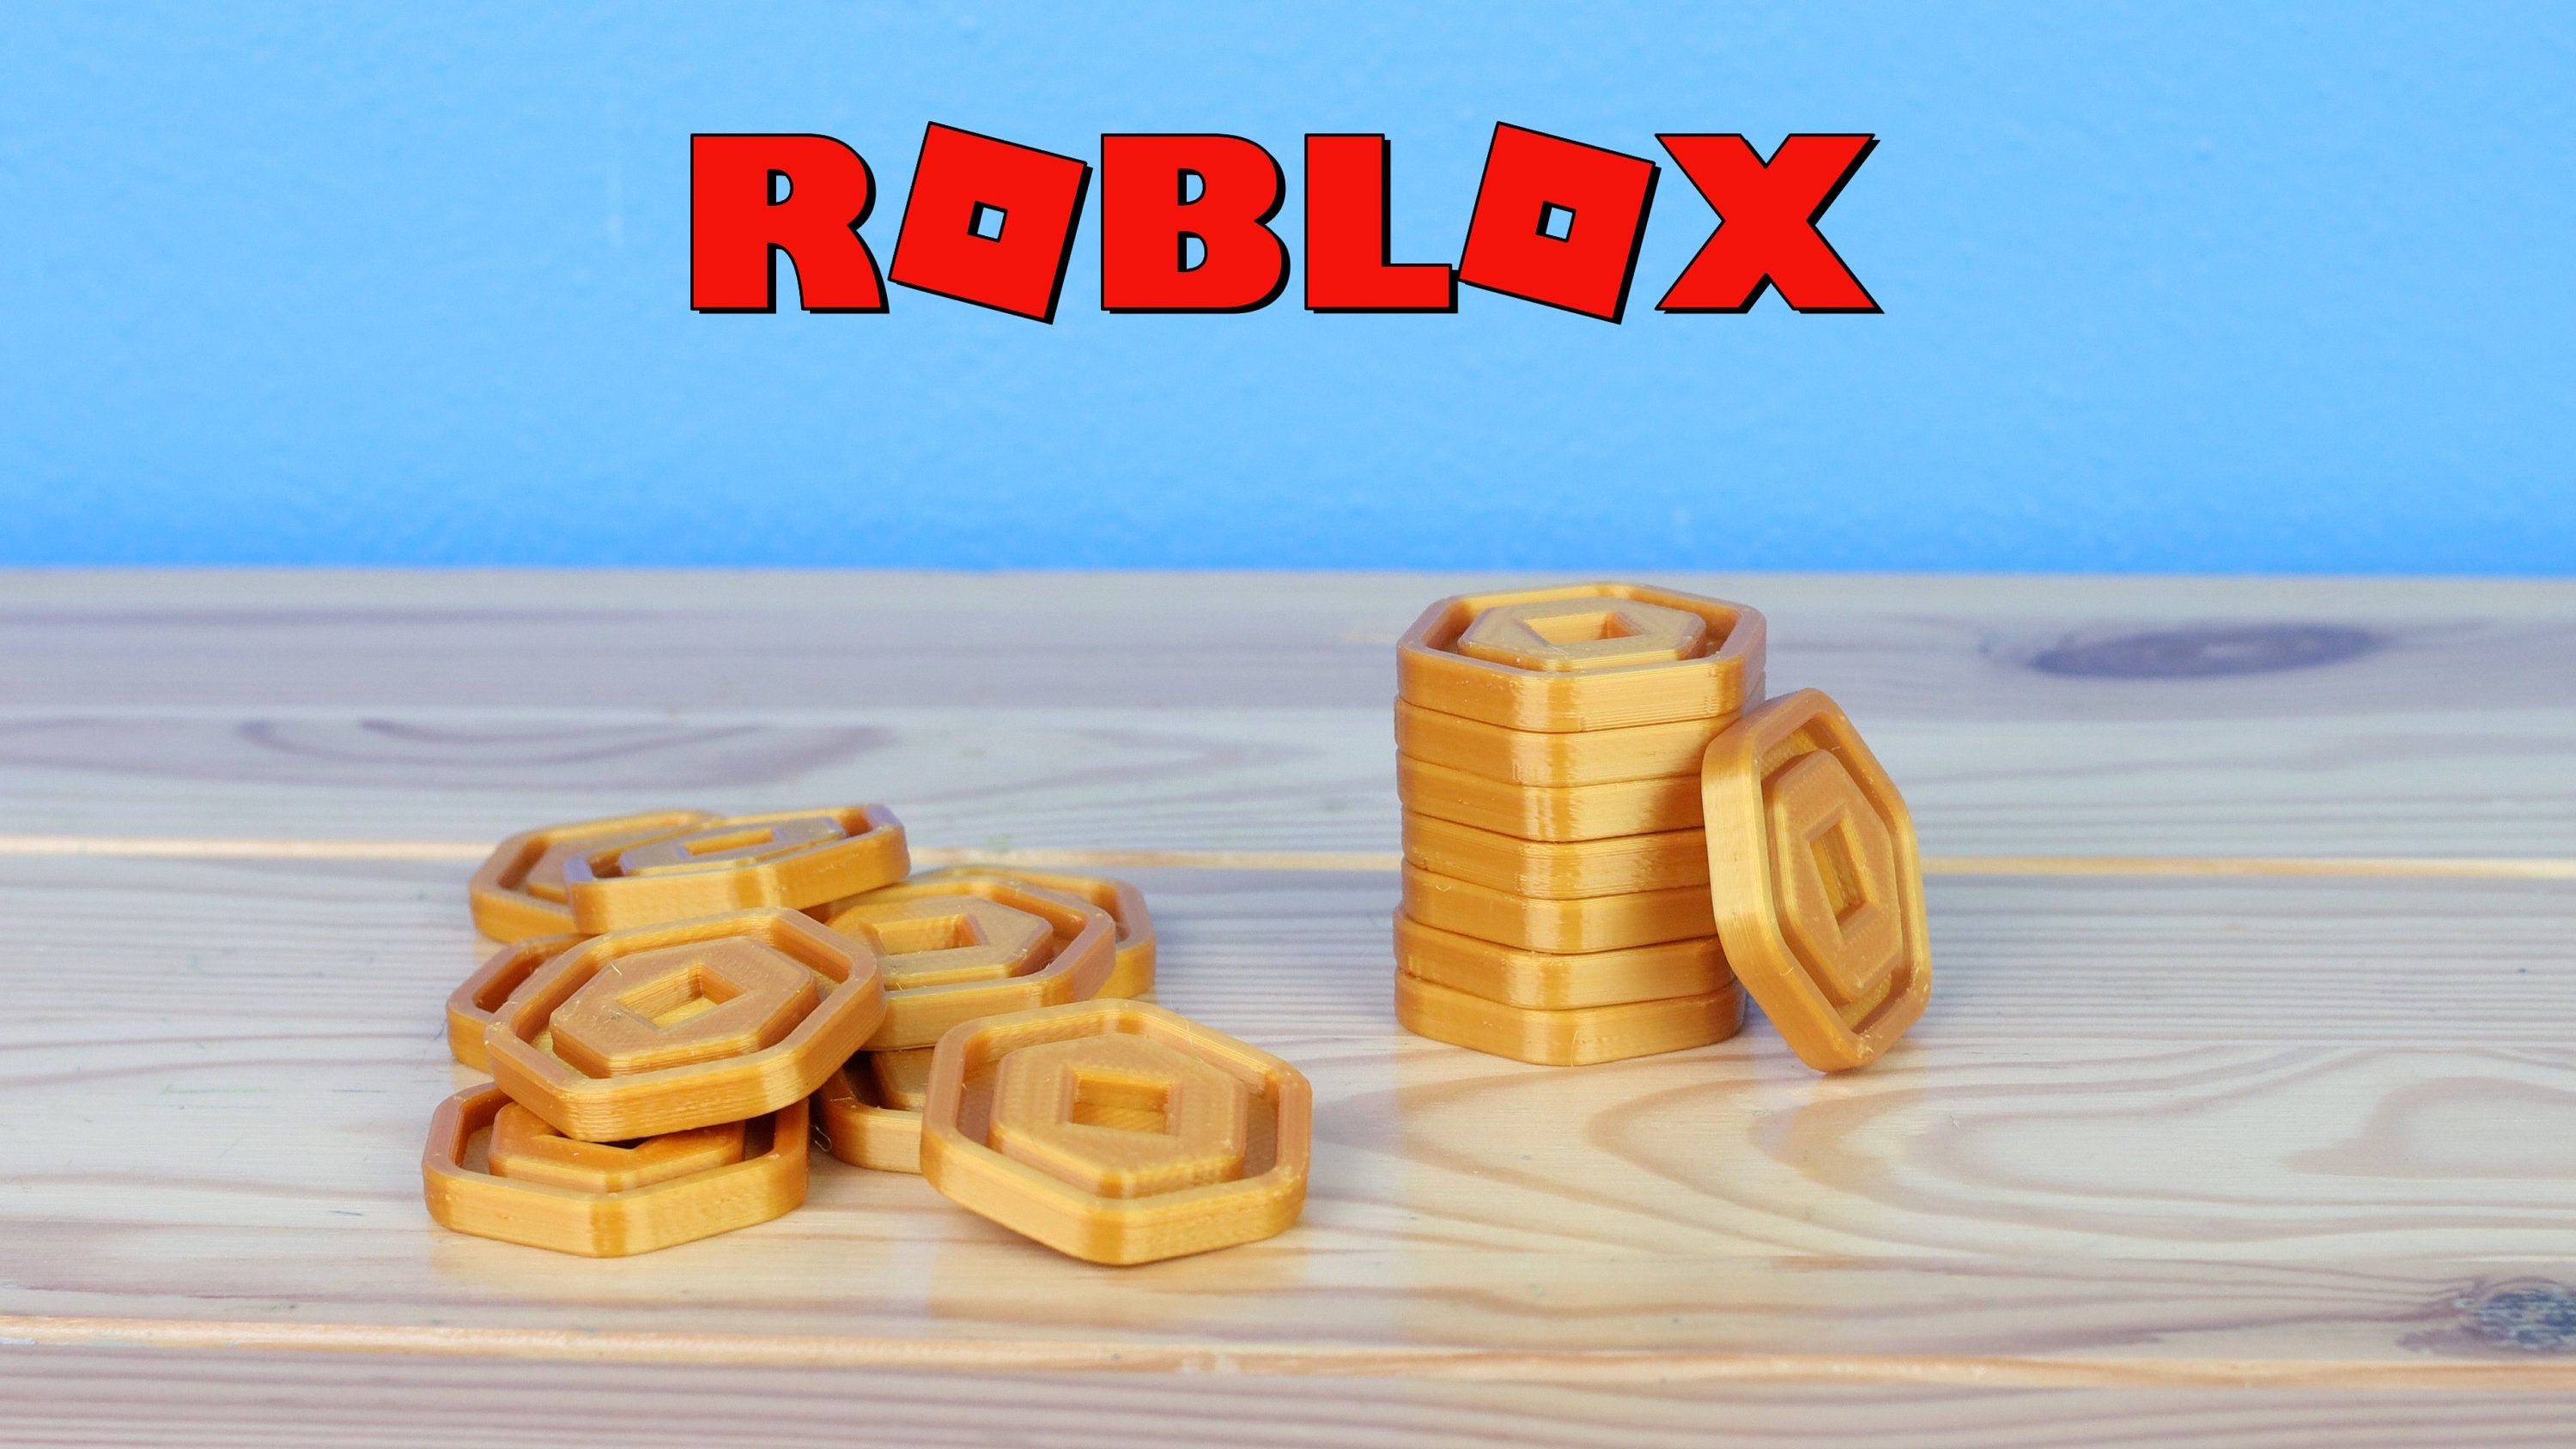 Neatly stacked robux - Roblox